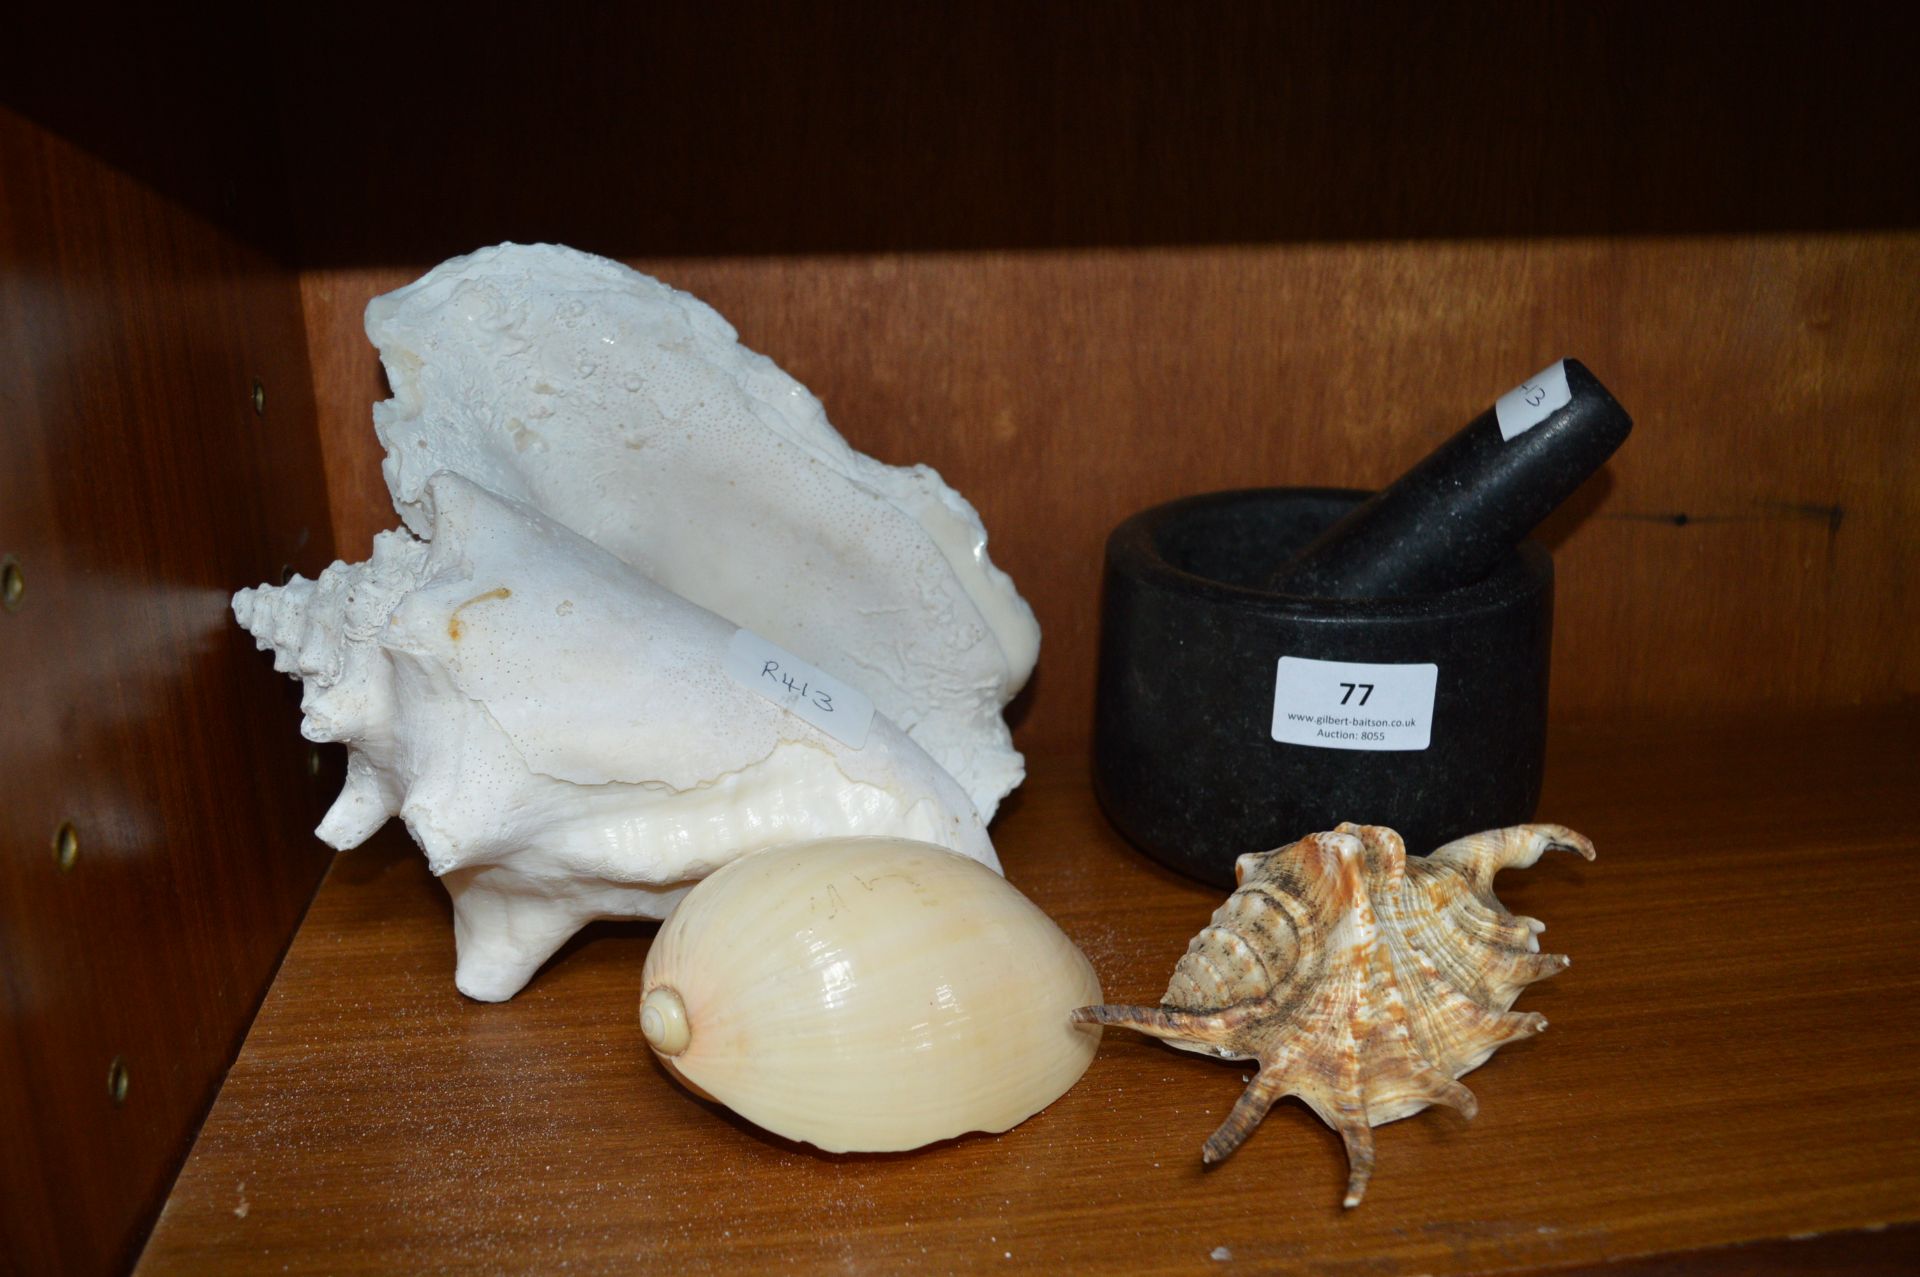 Collection of Shells, and a Pestle & Mortar